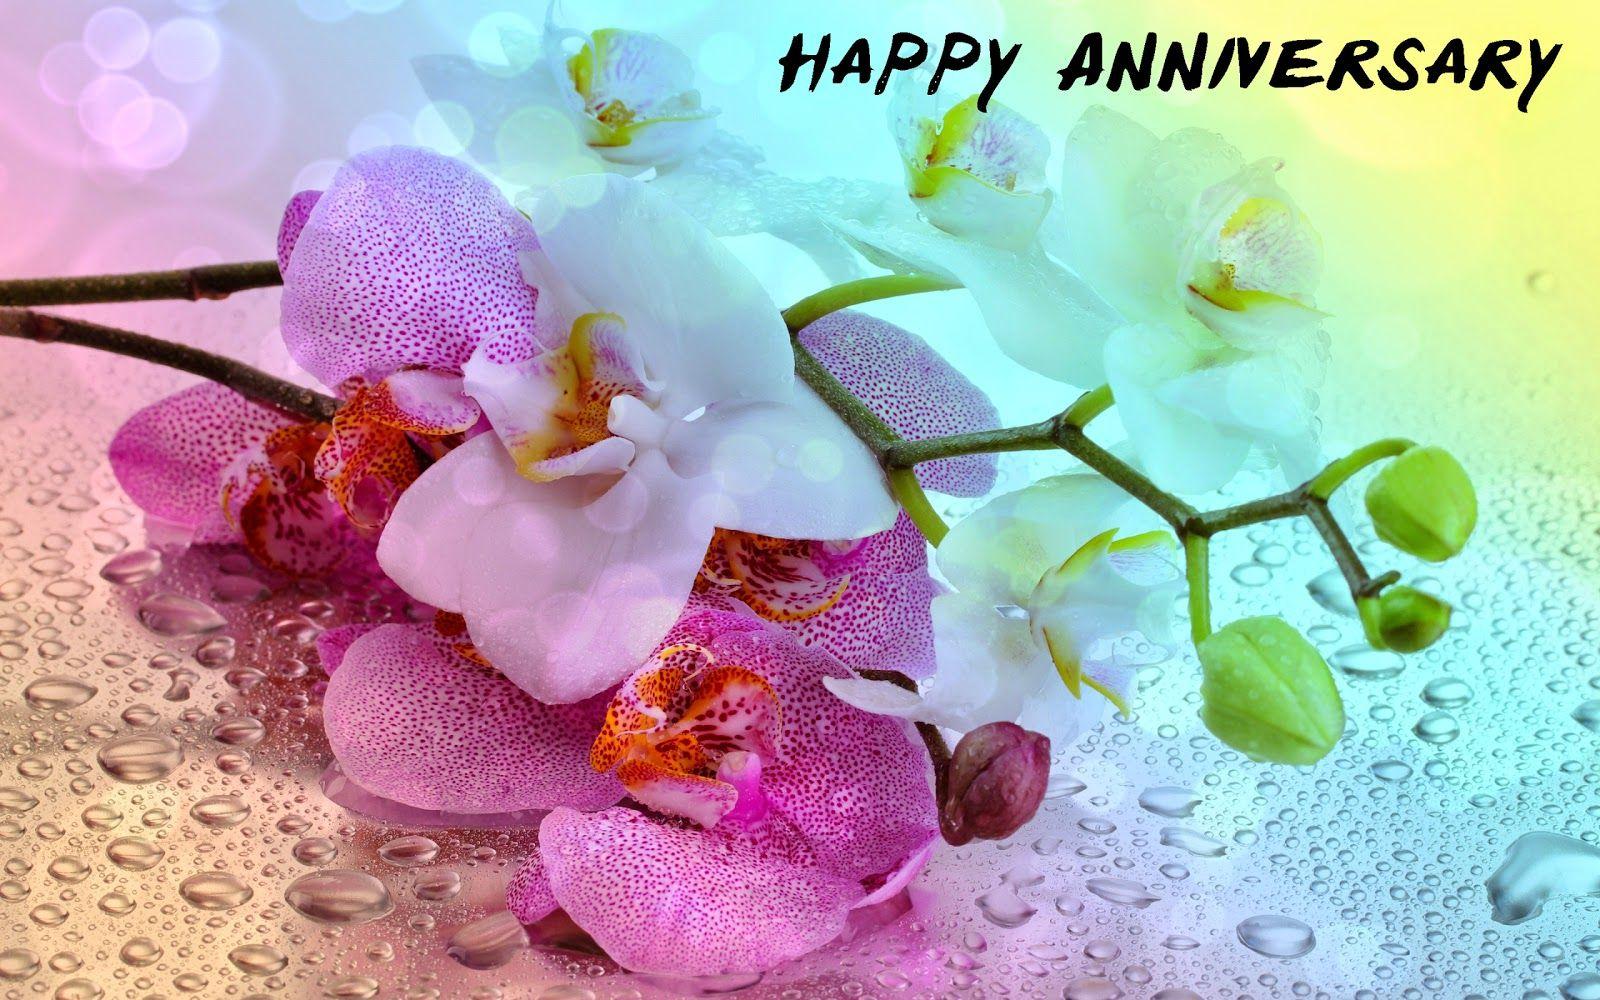 Best Happy Anniversary Image, Picture and Photo